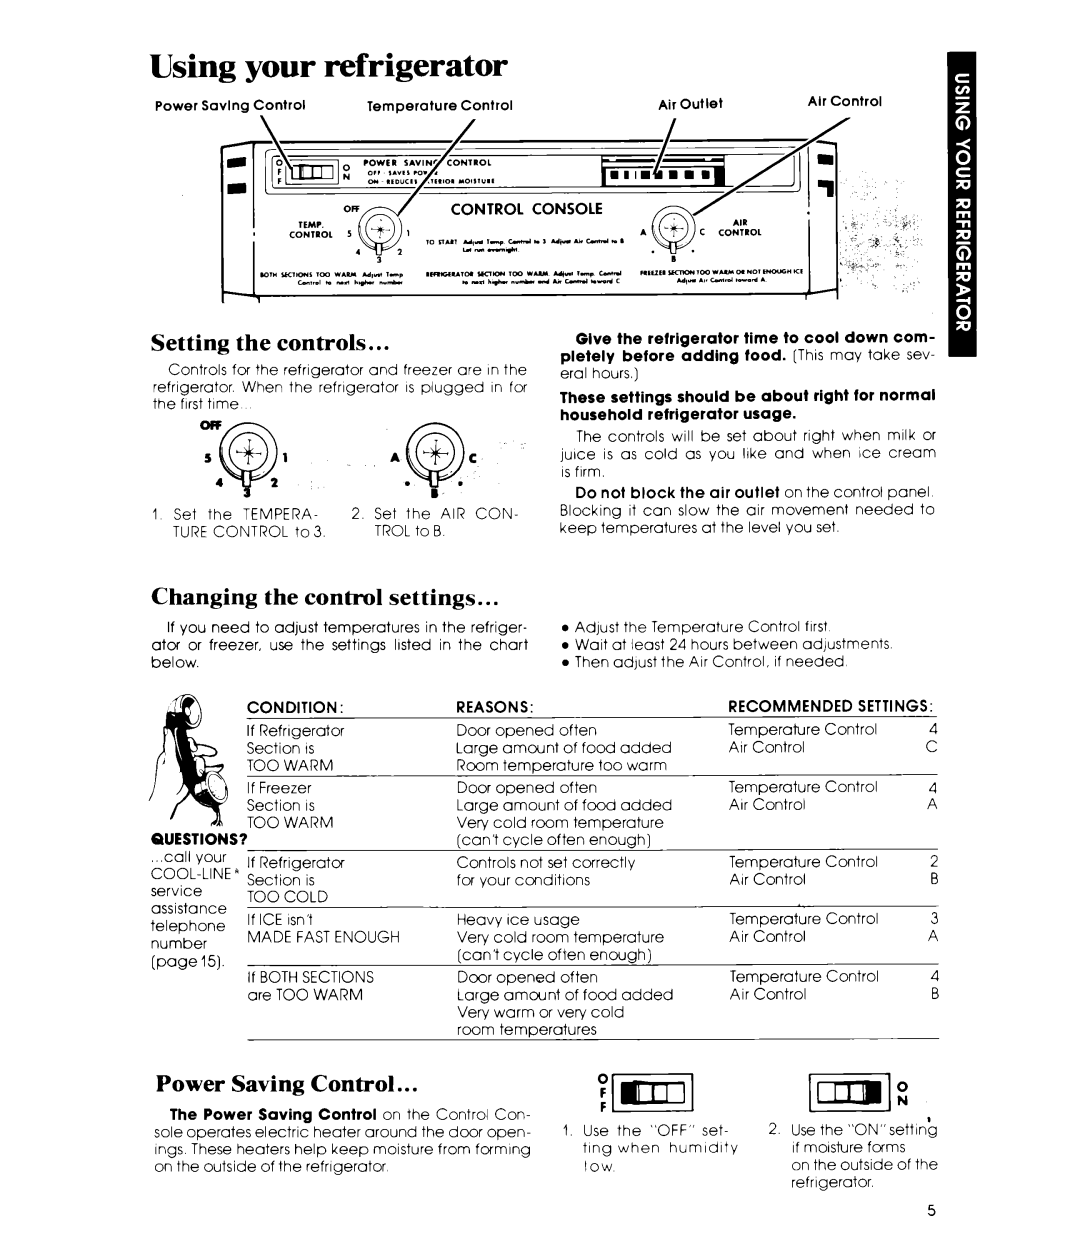 Whirlpool ET22ZK manual Using your refrigerator, Setting the controls, Changing the control settings, Power Saving Control 